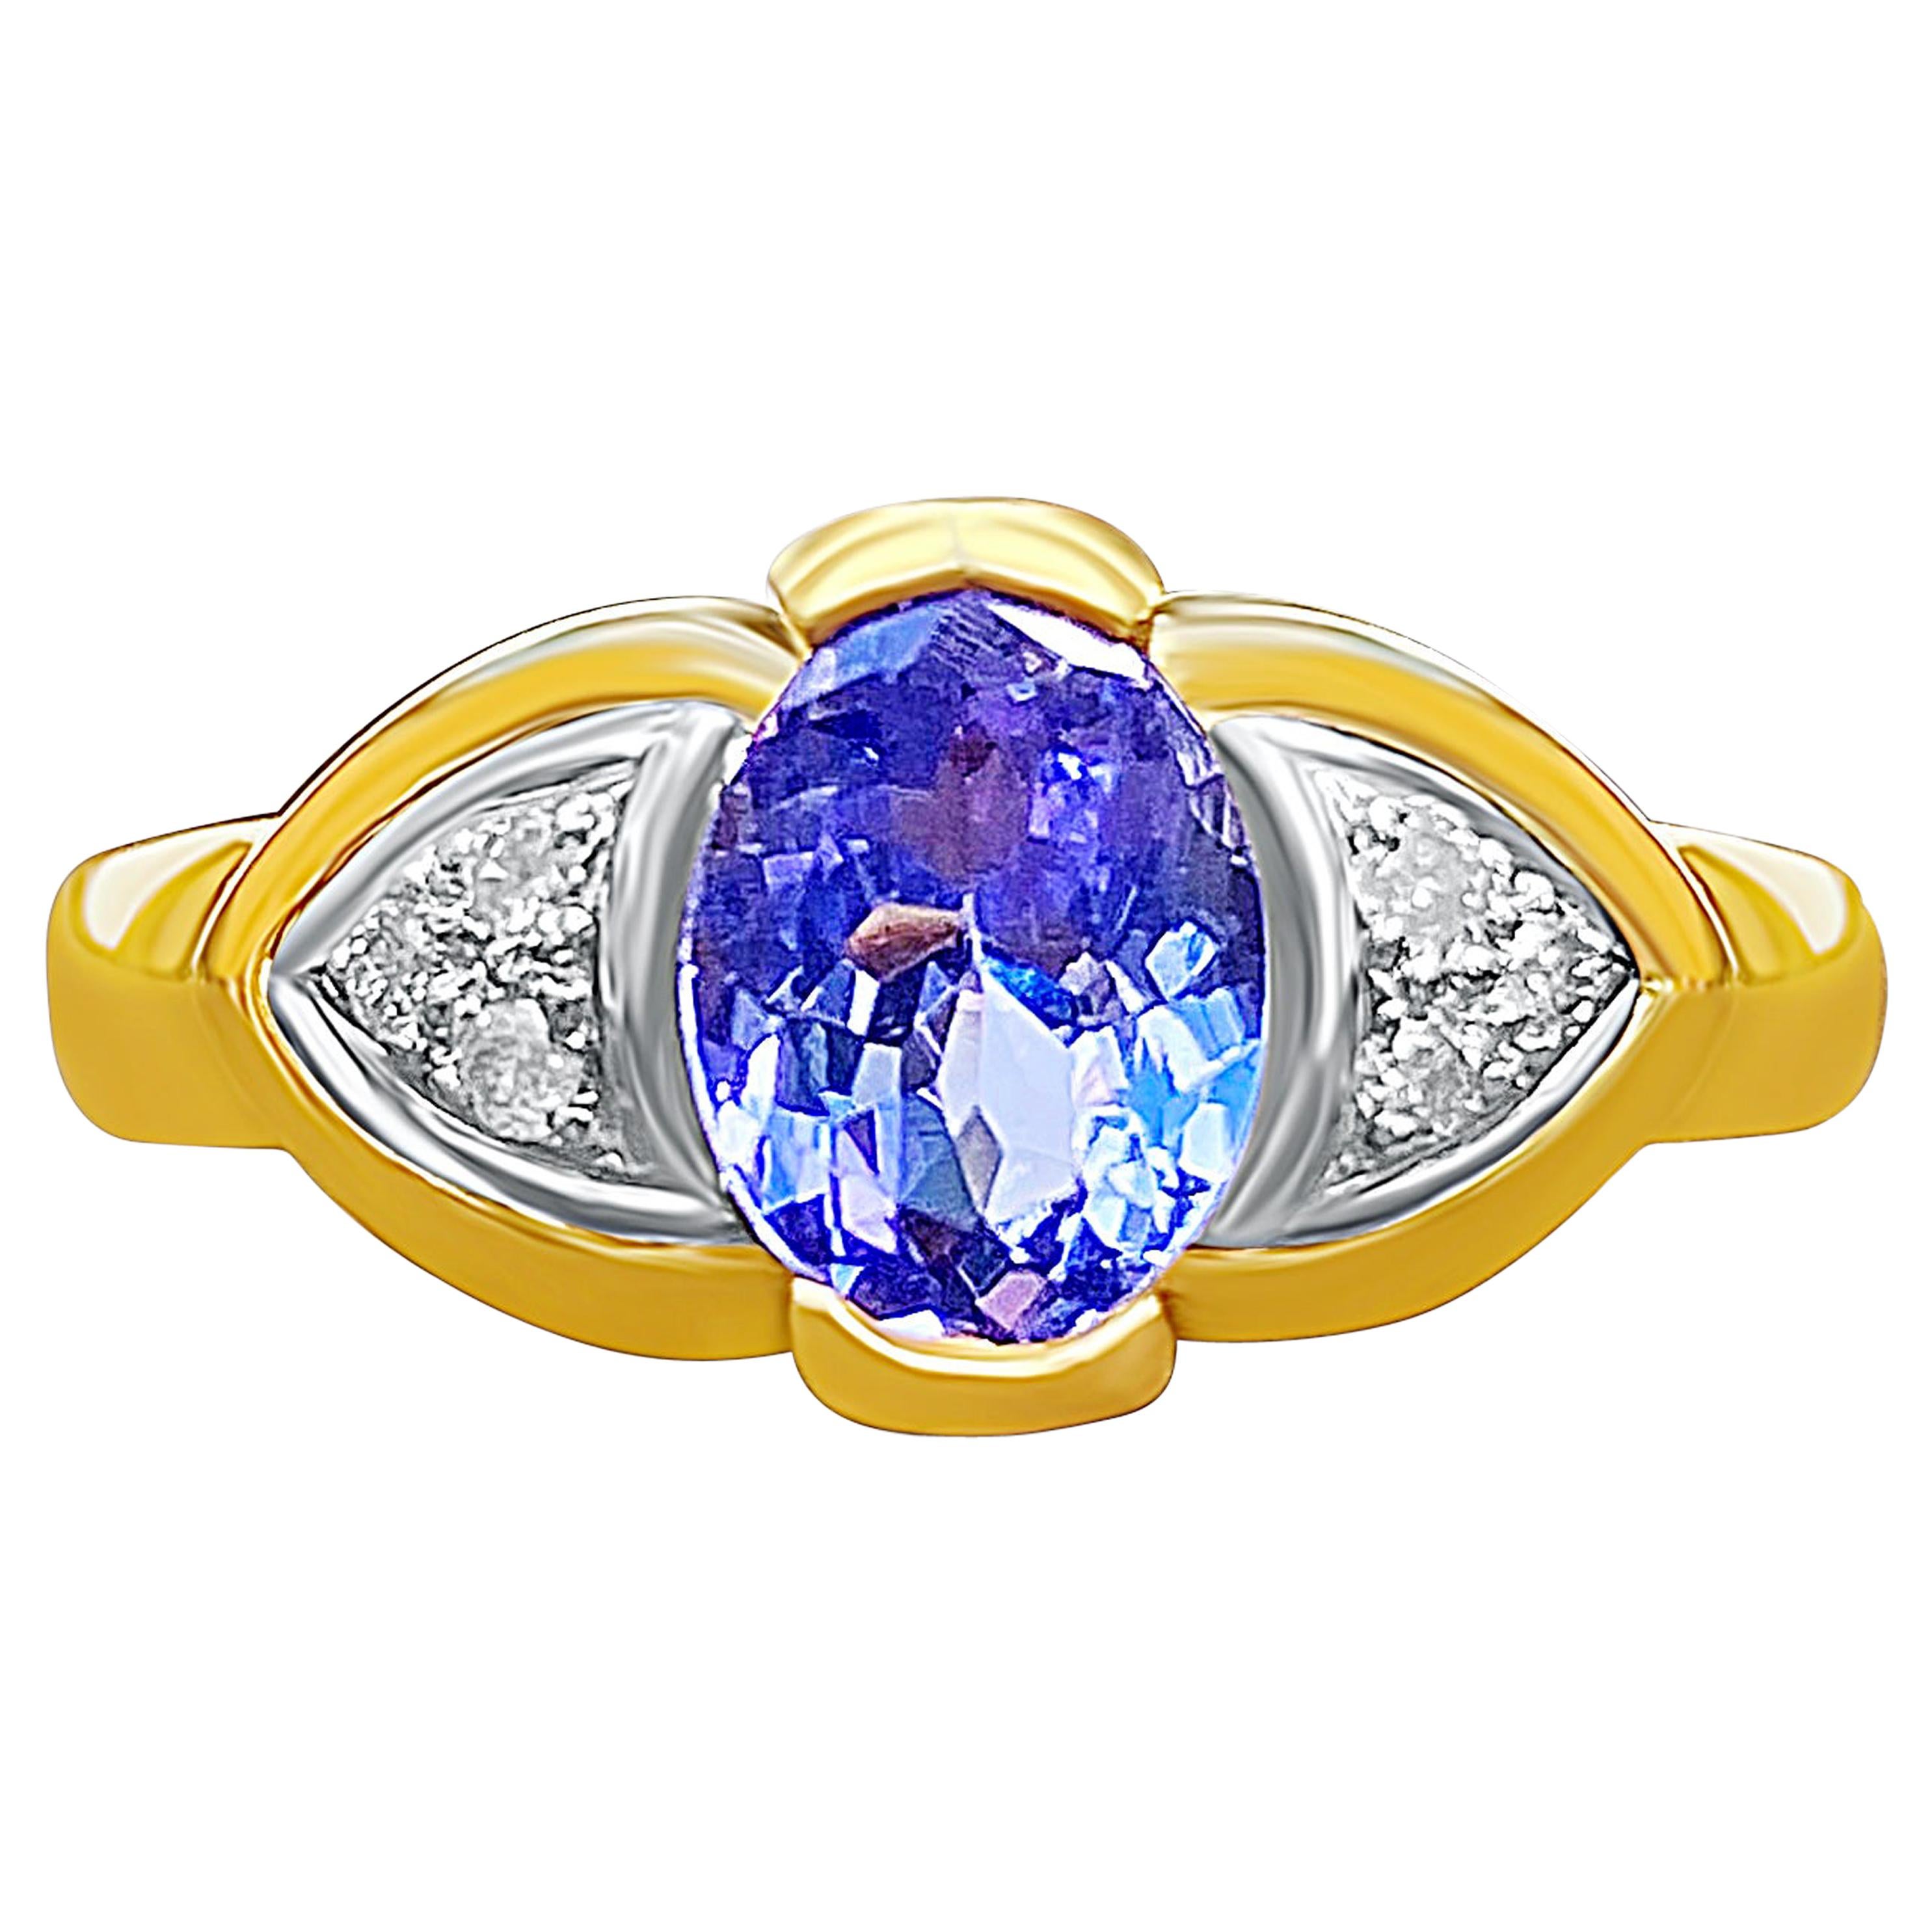 Photos "Evil Eye" 1.06ct Oval Cut Tanzanite and Diamond and 14K Yellow Gold Ring